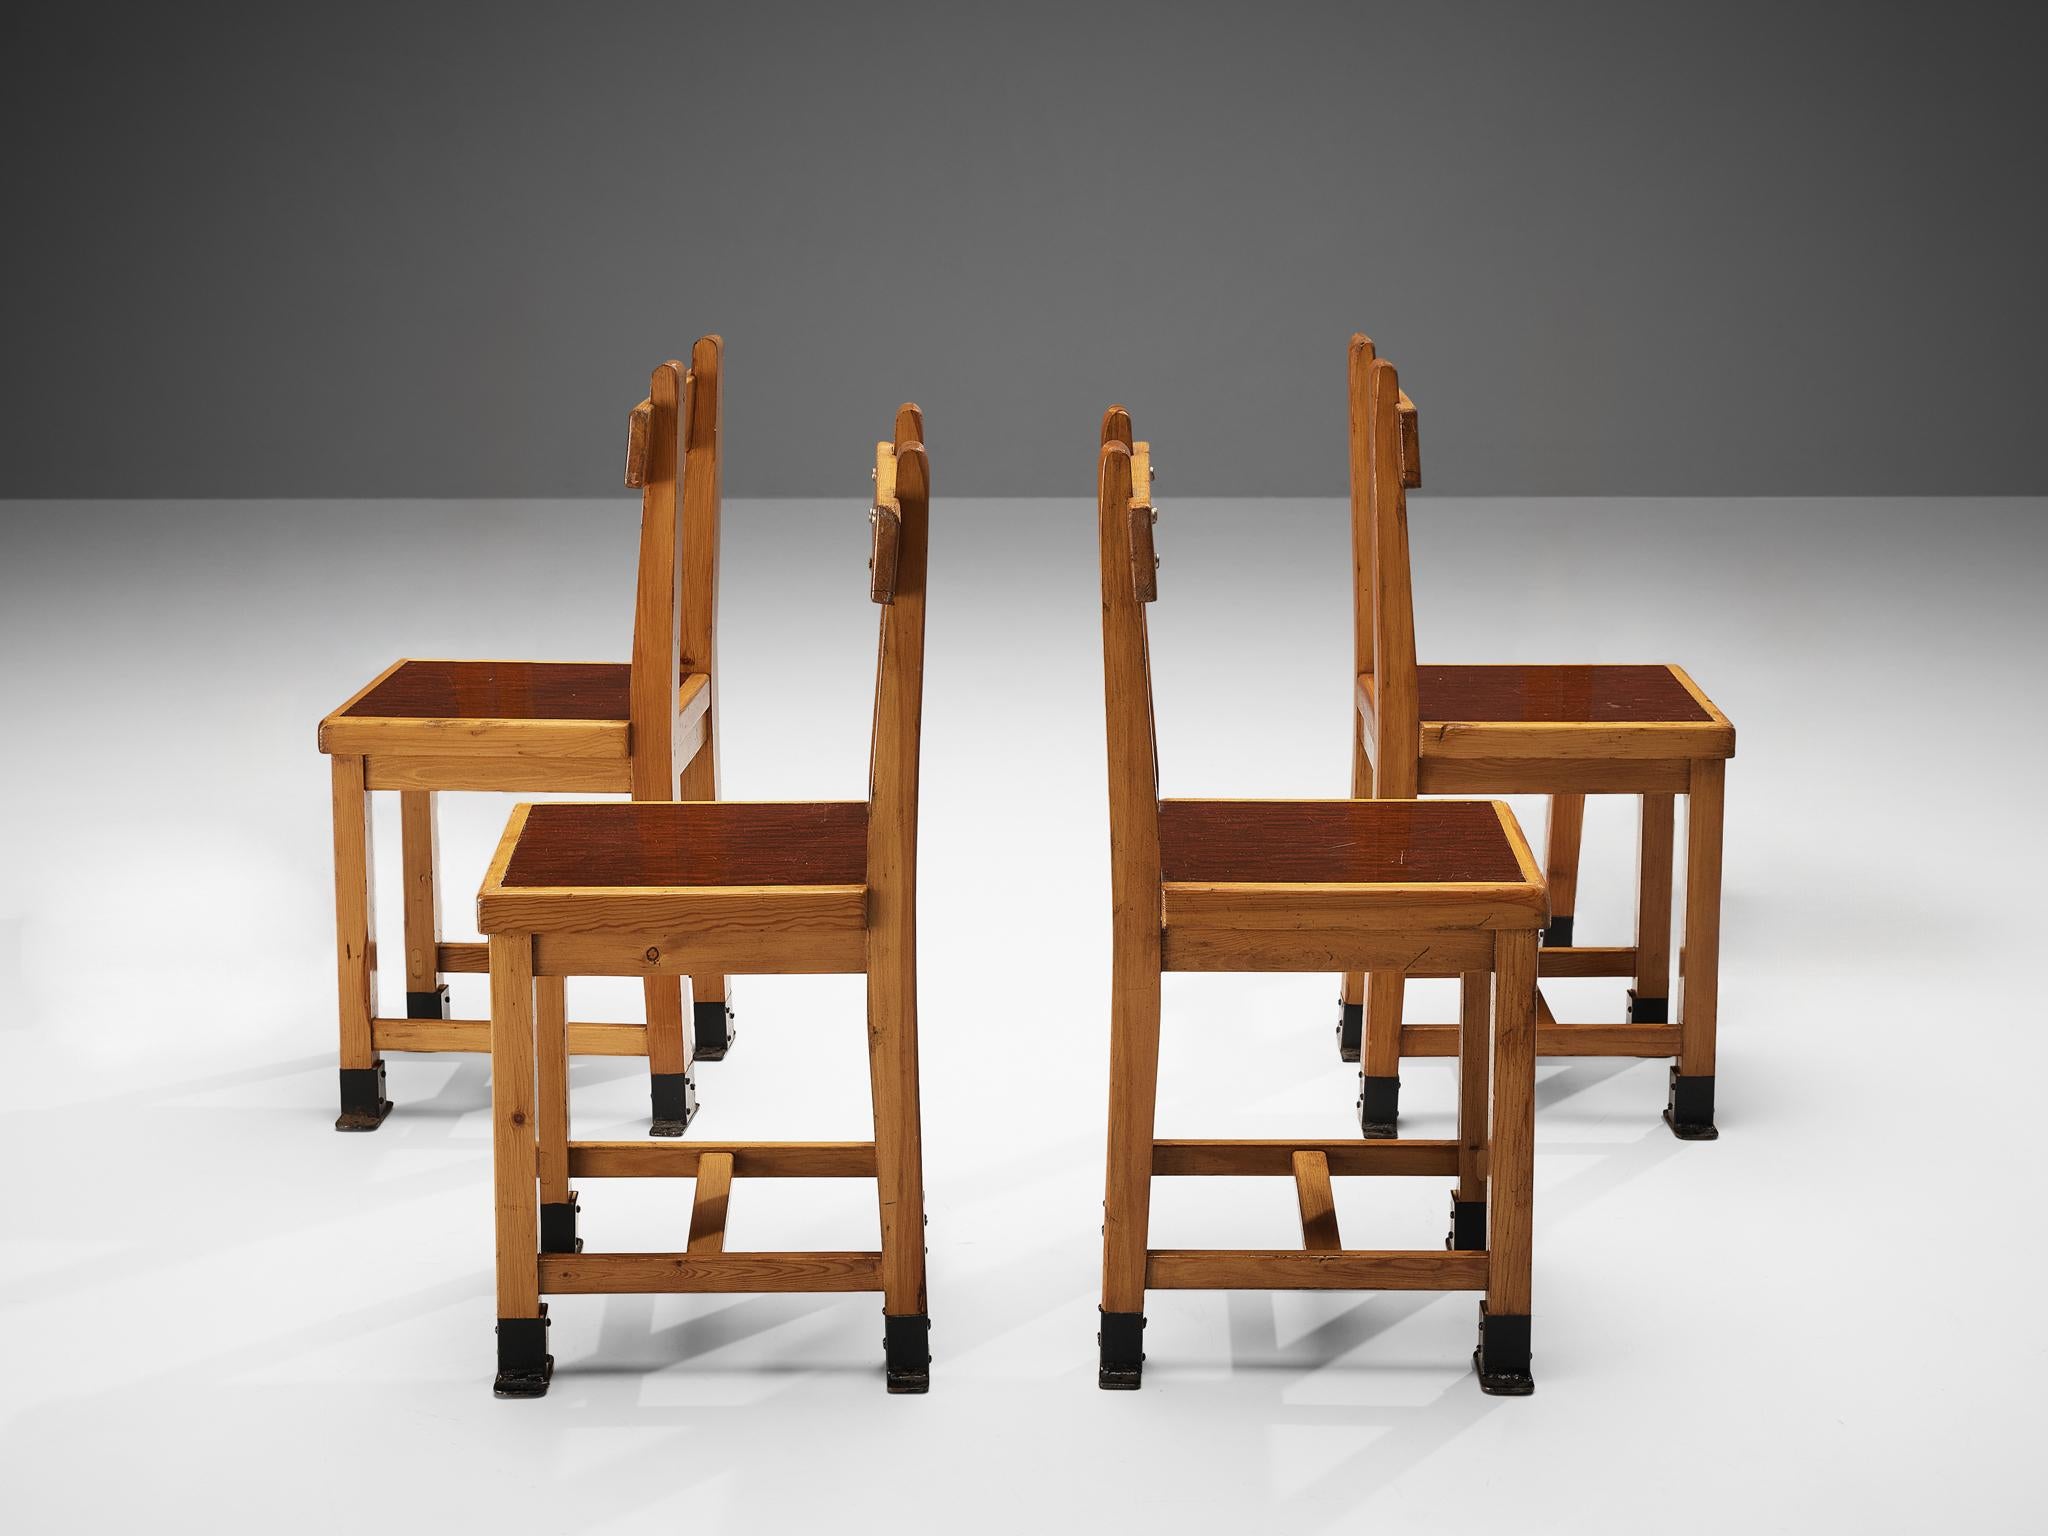 Set of four dining chairs, pine, metal, France, 1940s

This set of French dining chairs features a rather stunning design. Very strong and clean lines structure the chair in an admirable way. Characteristic are the black metal feet that fit within